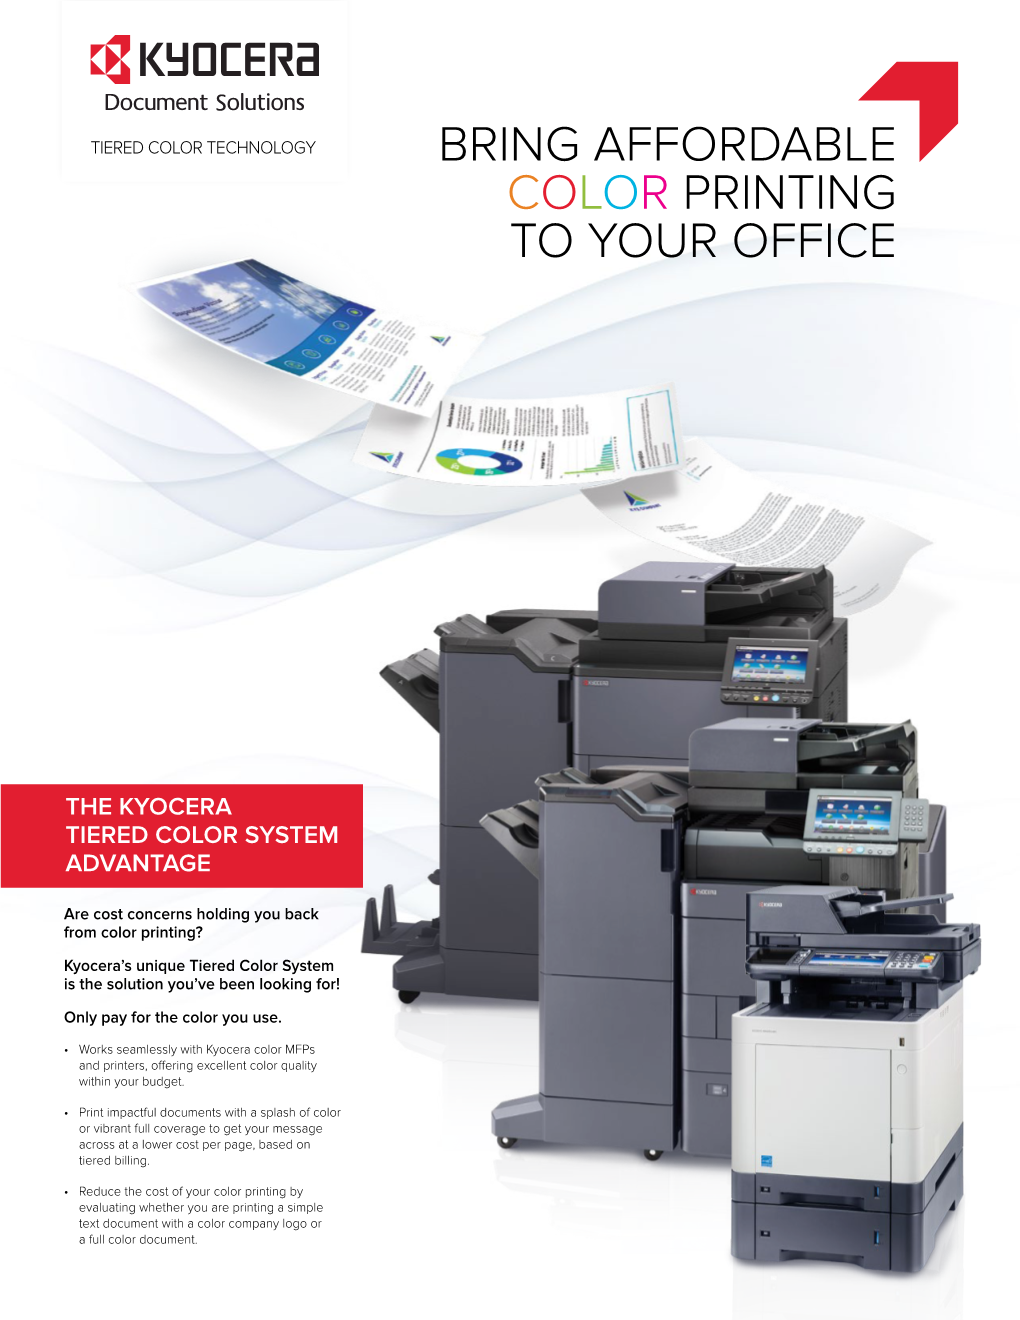 Learn More About Our Tiered Color Printing